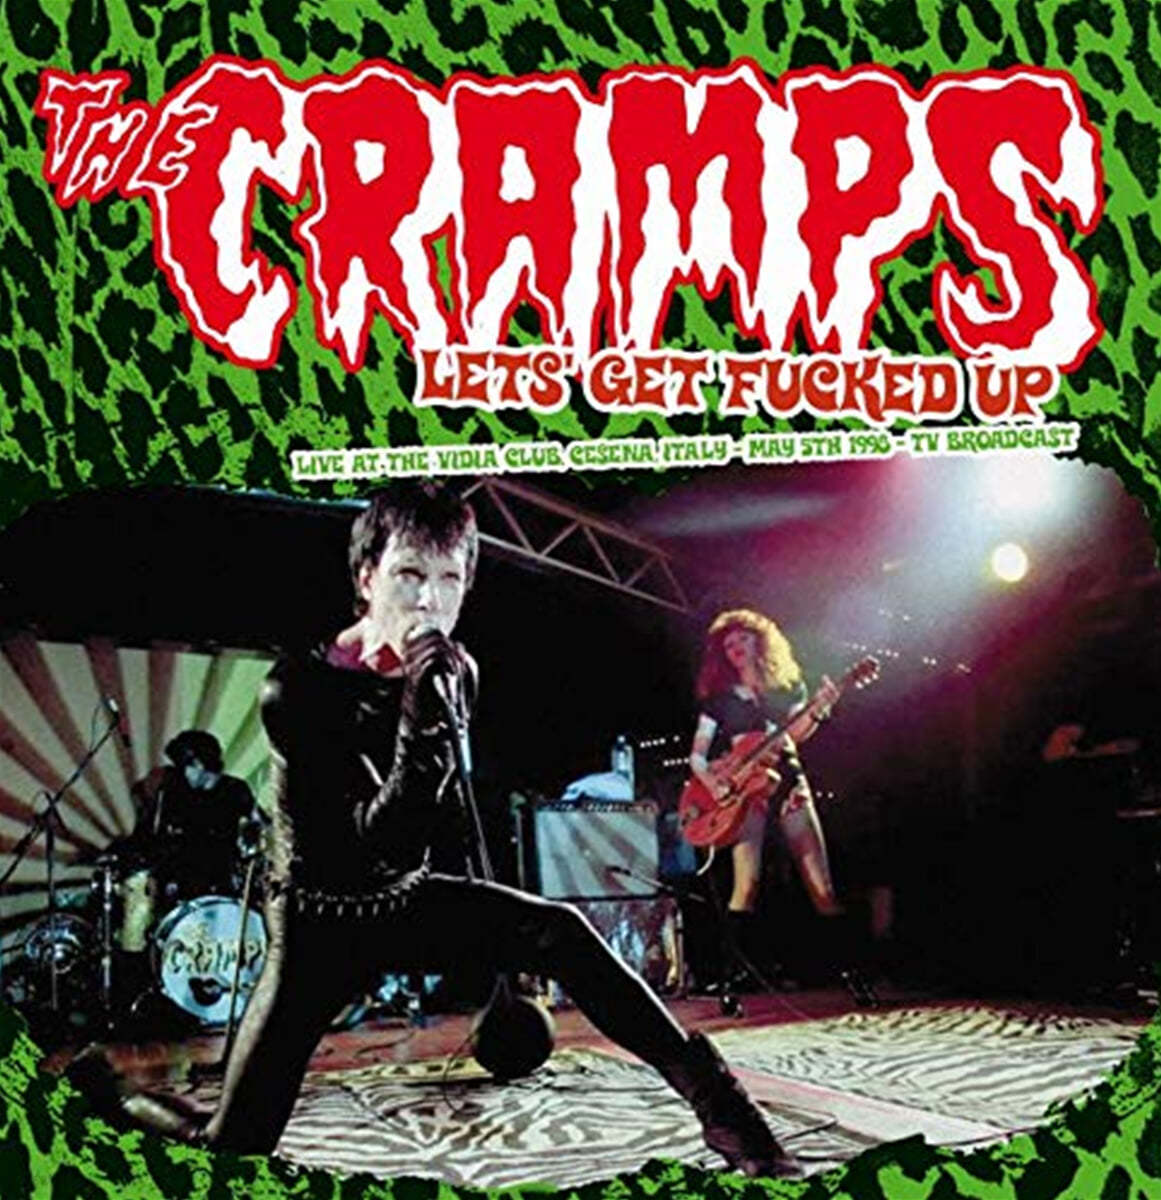 The Cramps (크램프스) - Let's Get Fucked Up : Live At The Vidia Club Cesena, Italy - May 5th 1998 - TV Broadcast [2LP]